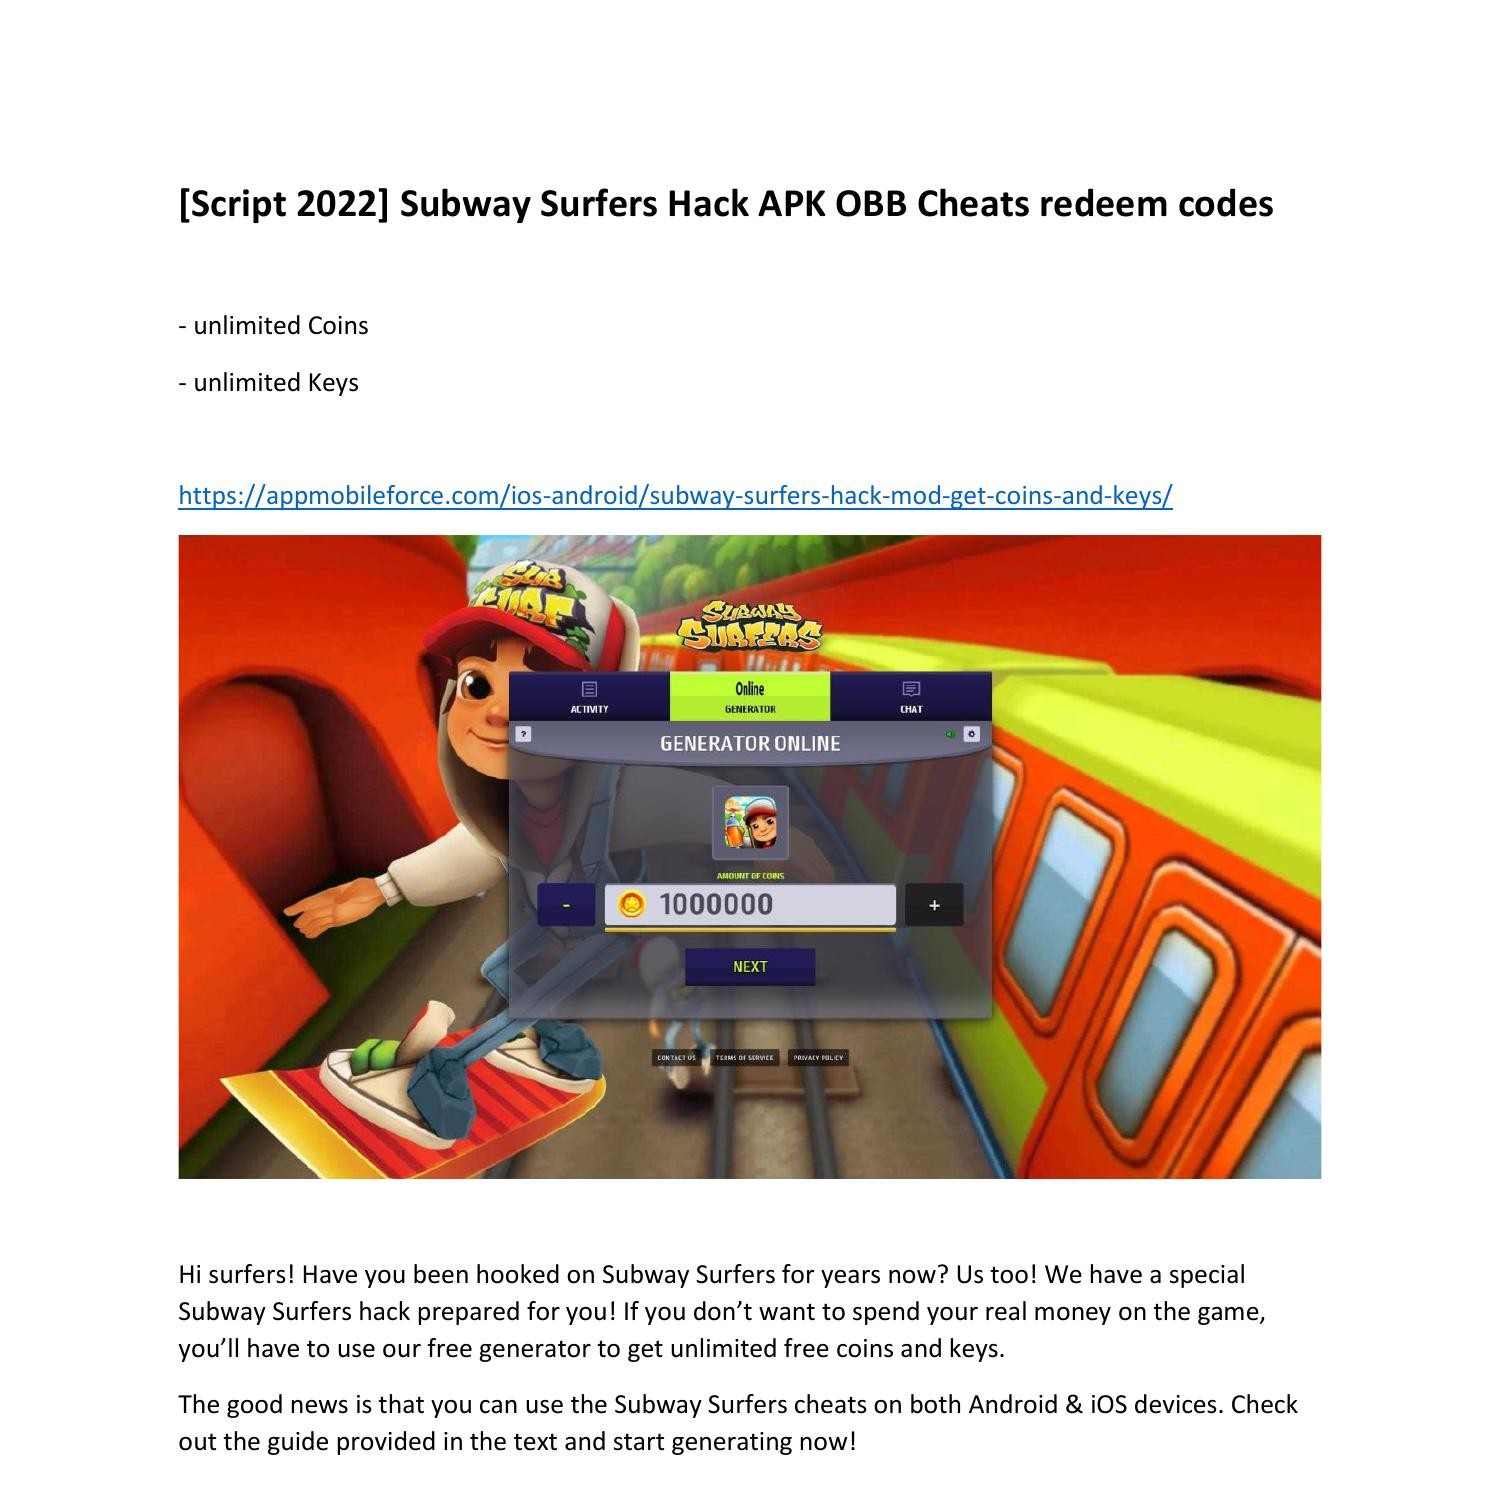 Unlimited coins and keys for free in Subway Surfers